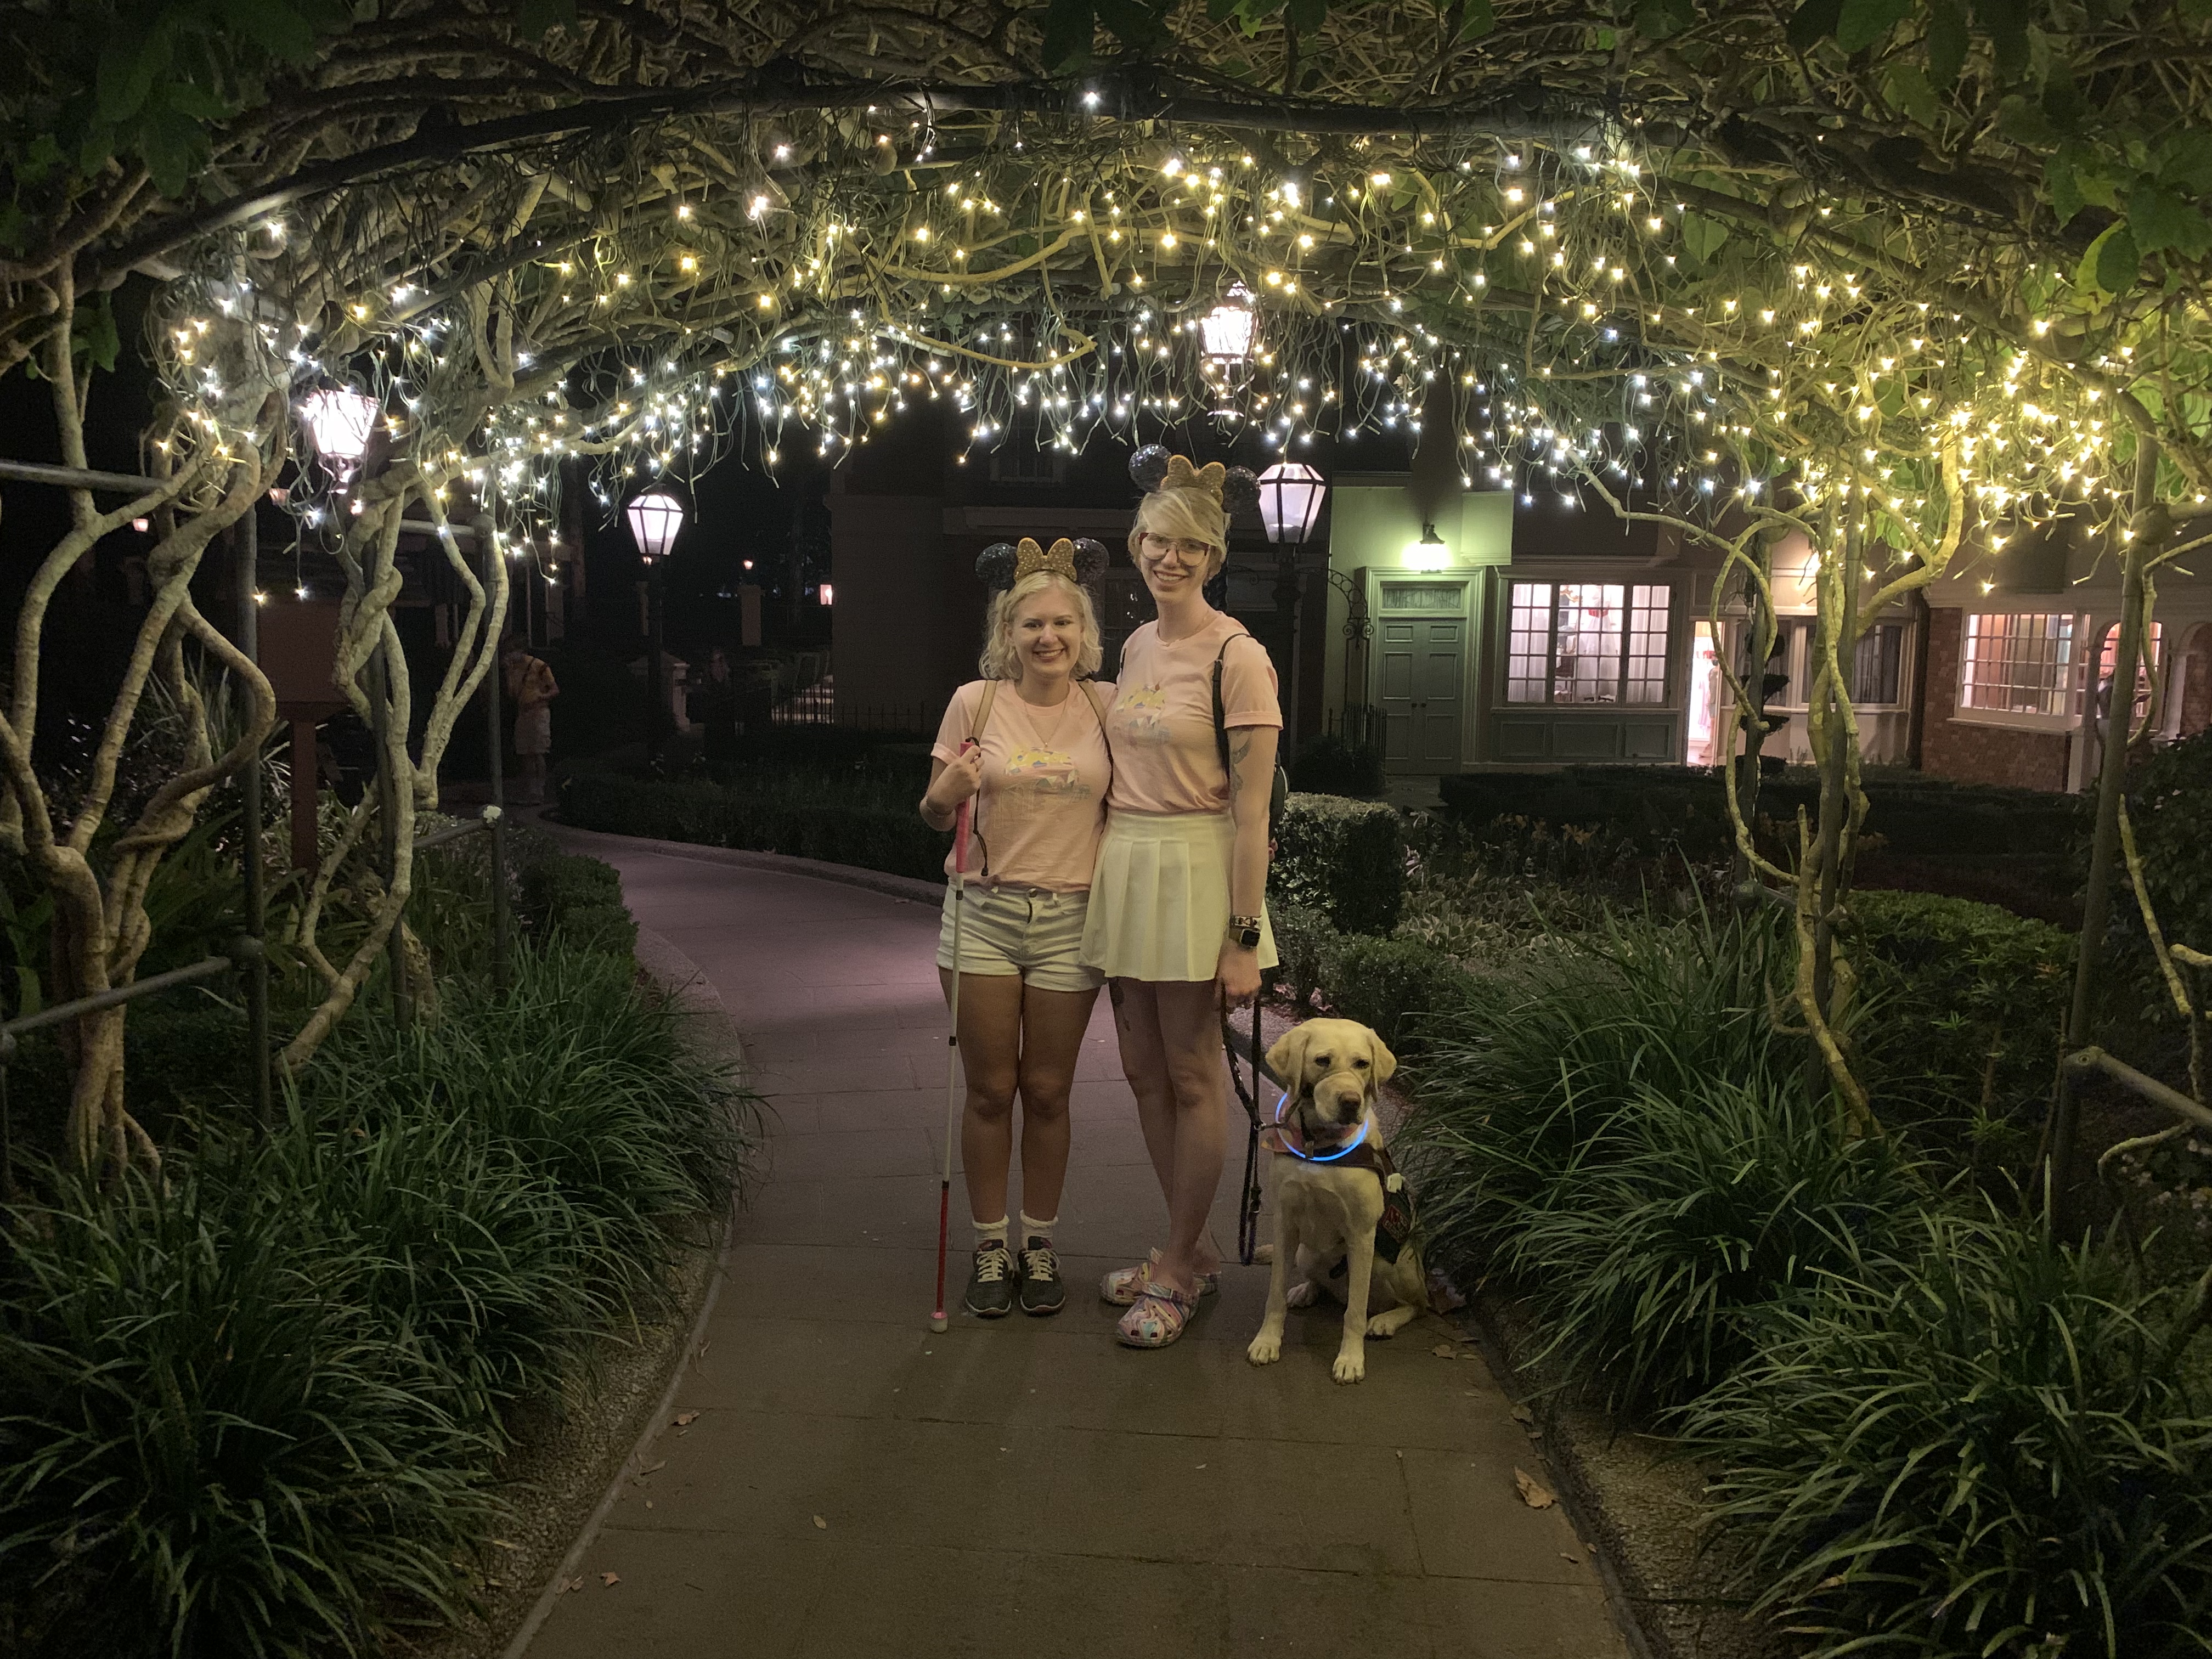 casey and cassandra in disney at night. they wear matching light pink tops, white bottoms, and identical mickey ears. they stand under an illuminated garden arch and smile with their arms around each other